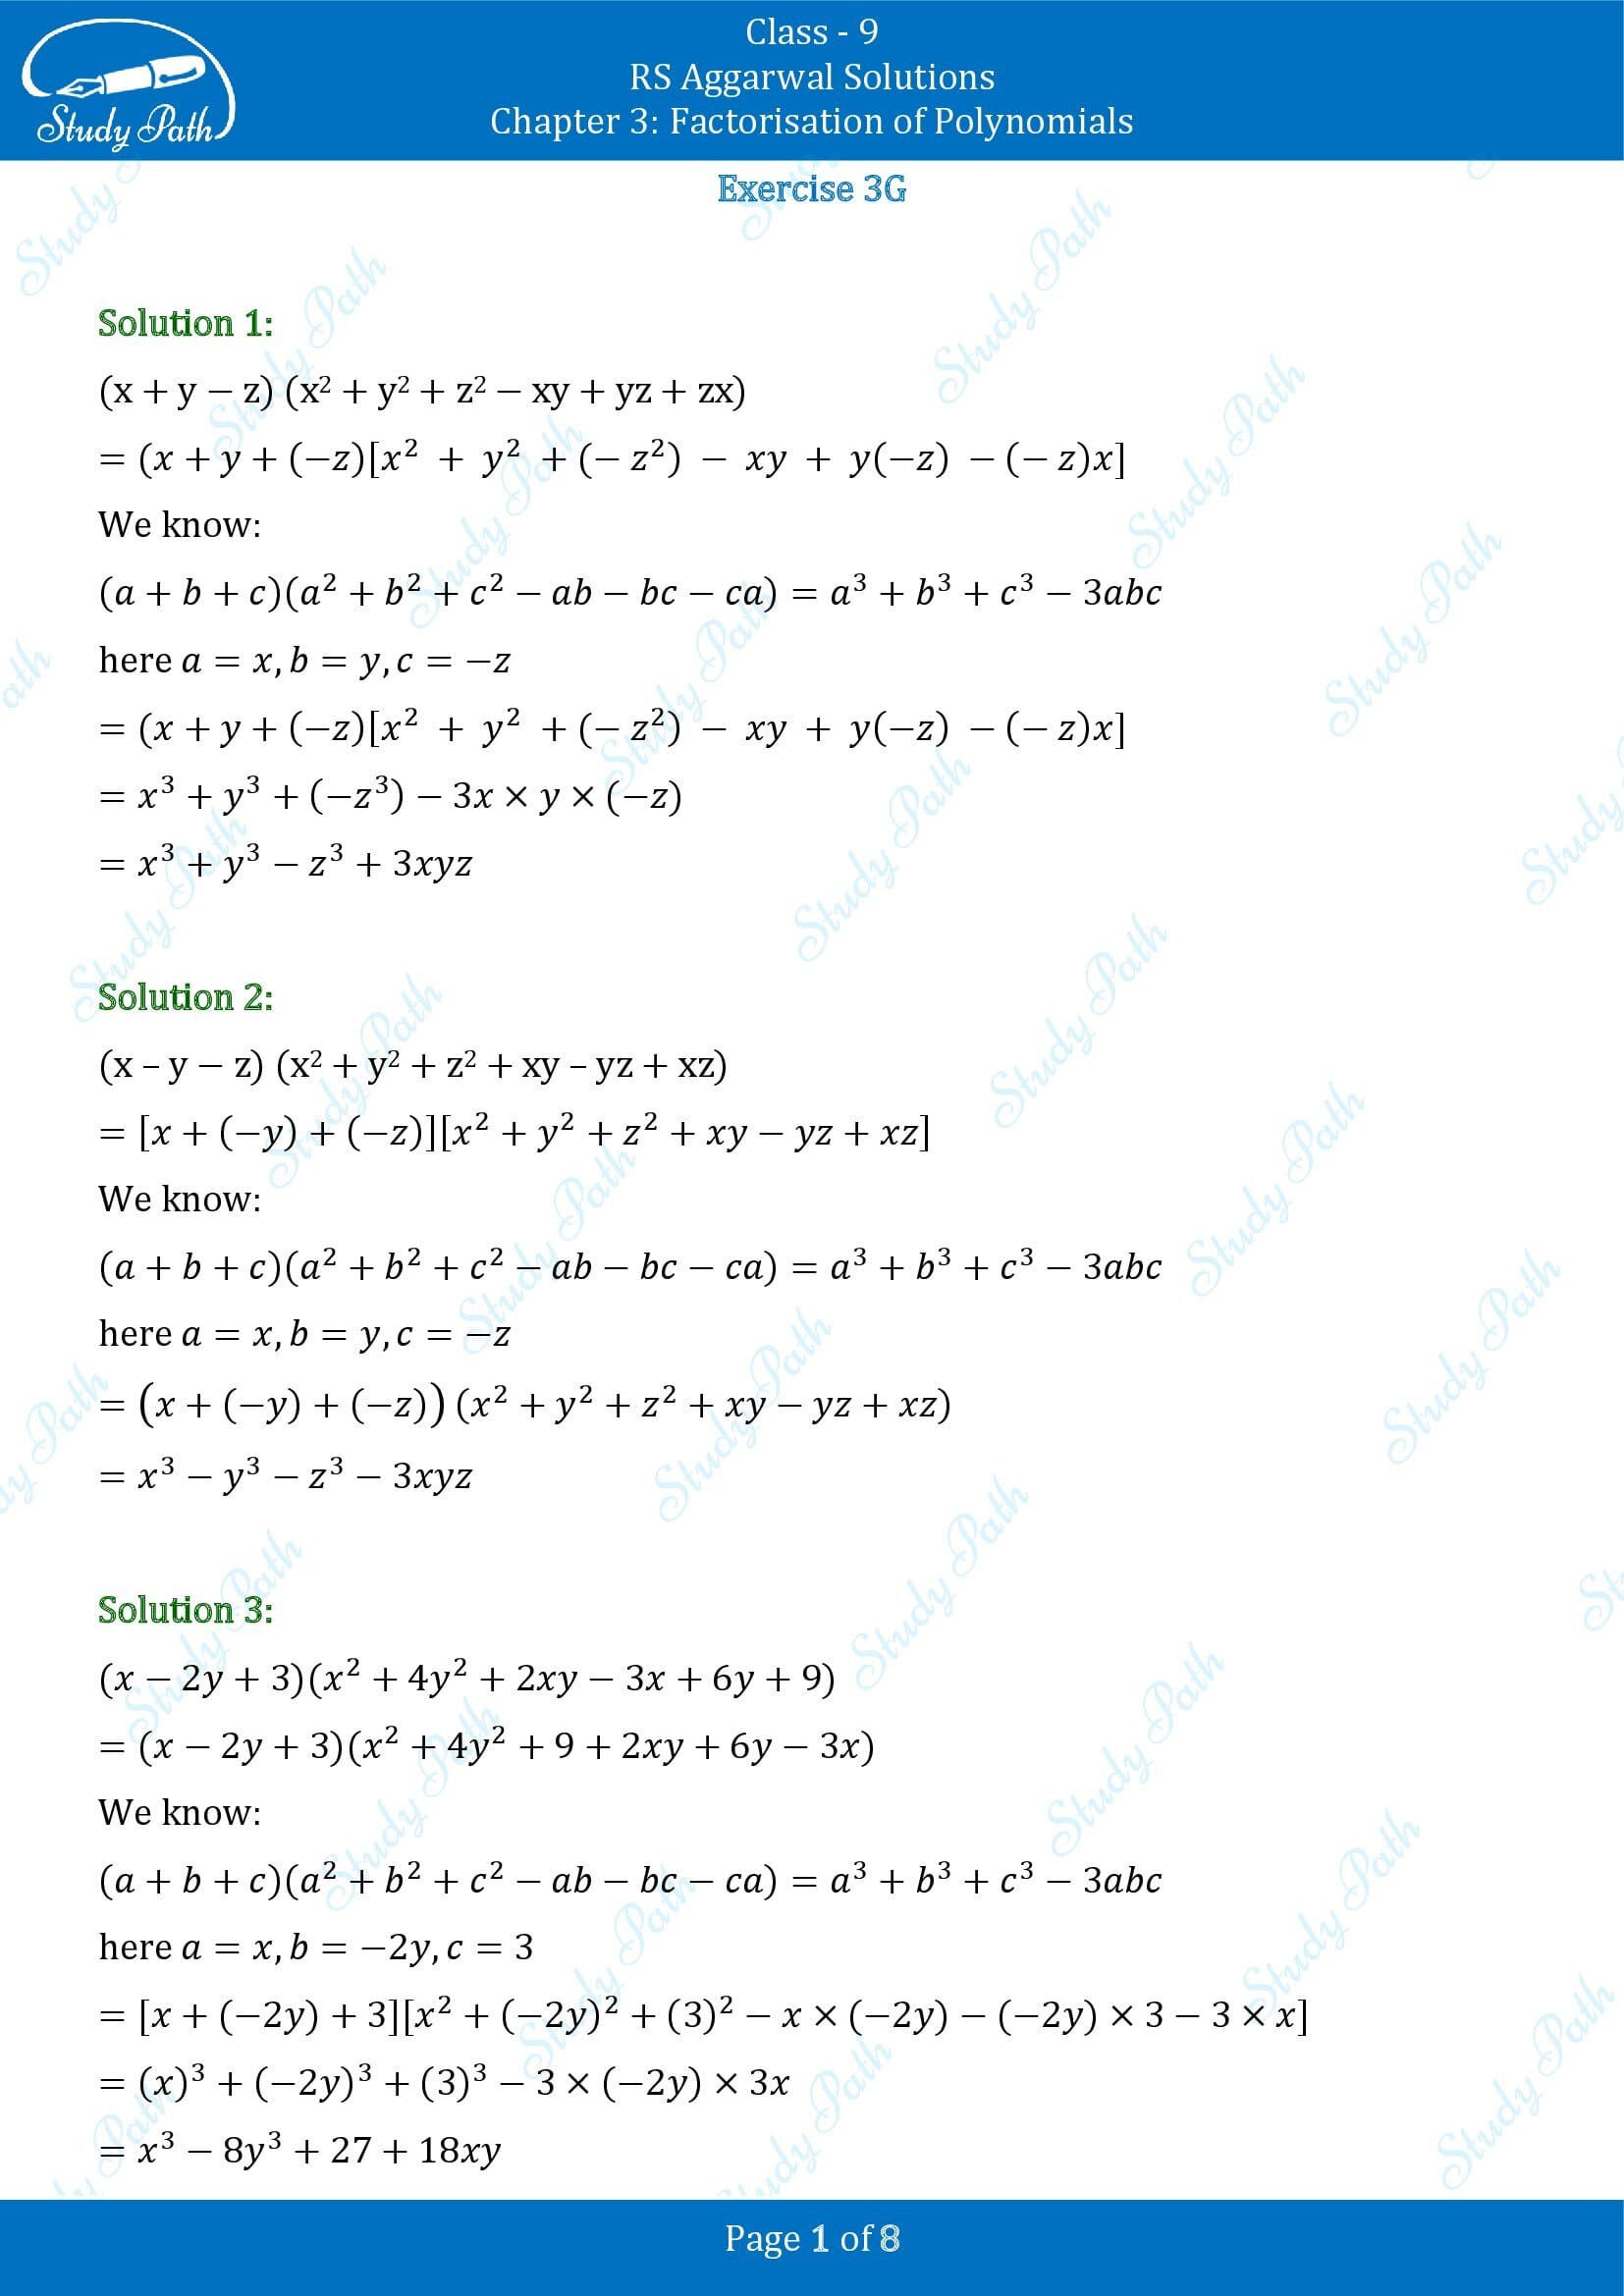 RS Aggarwal Solutions Class 9 Chapter 3 Factorisation of Polynomials Exercise 3G 0001